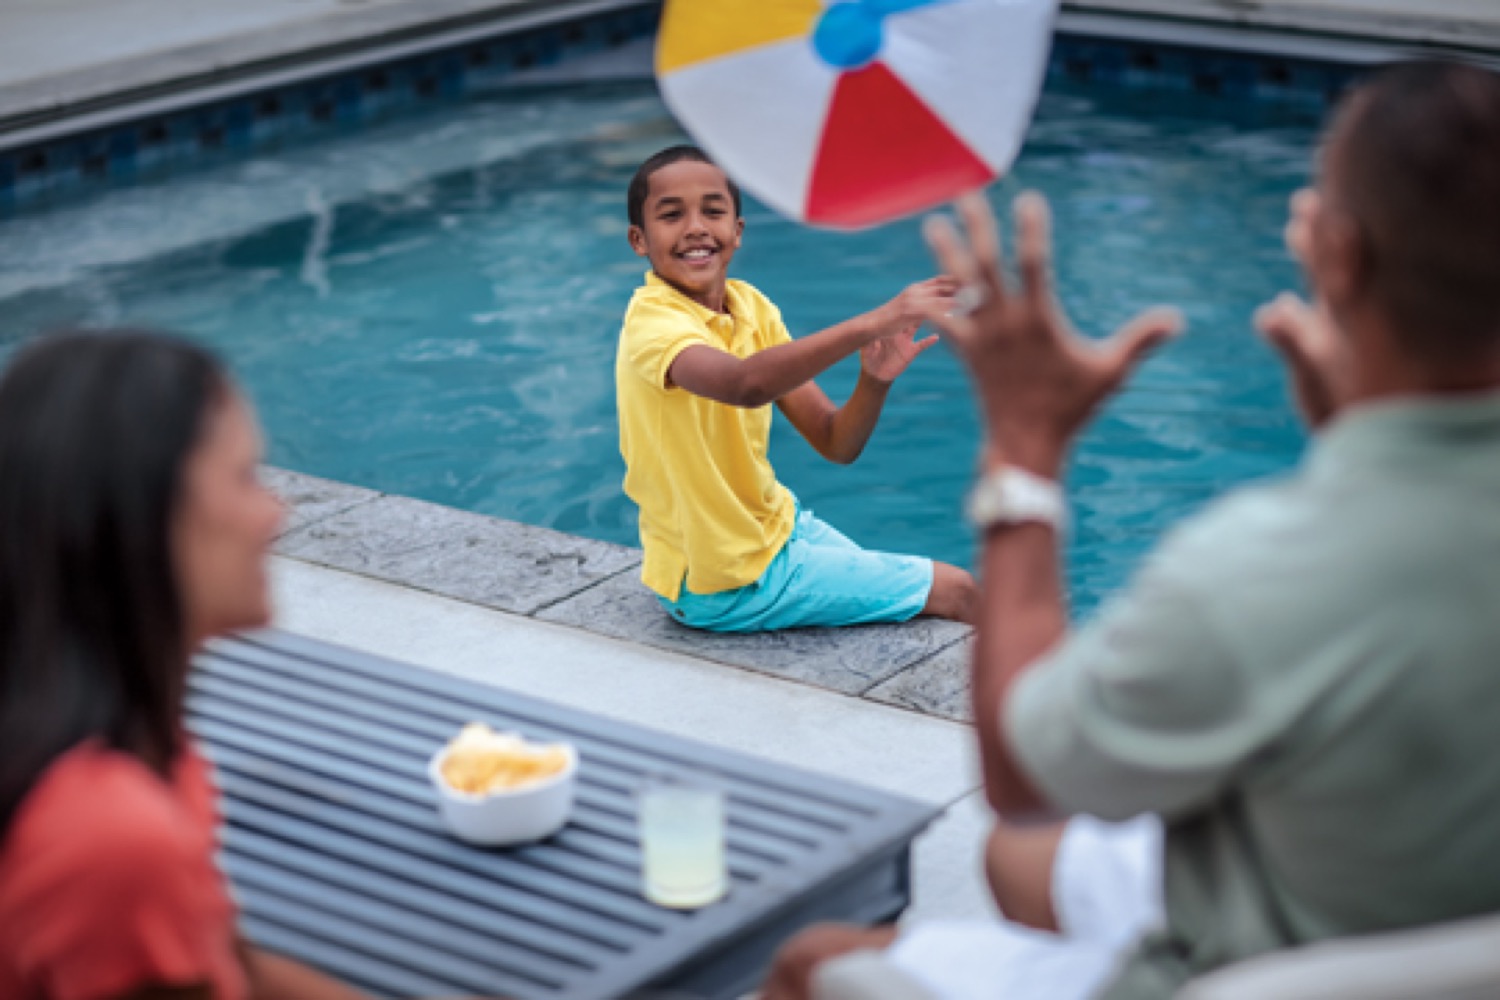 A smiling boy sitting on the edge of a swimming pool tosses a beach ball back towards his father.